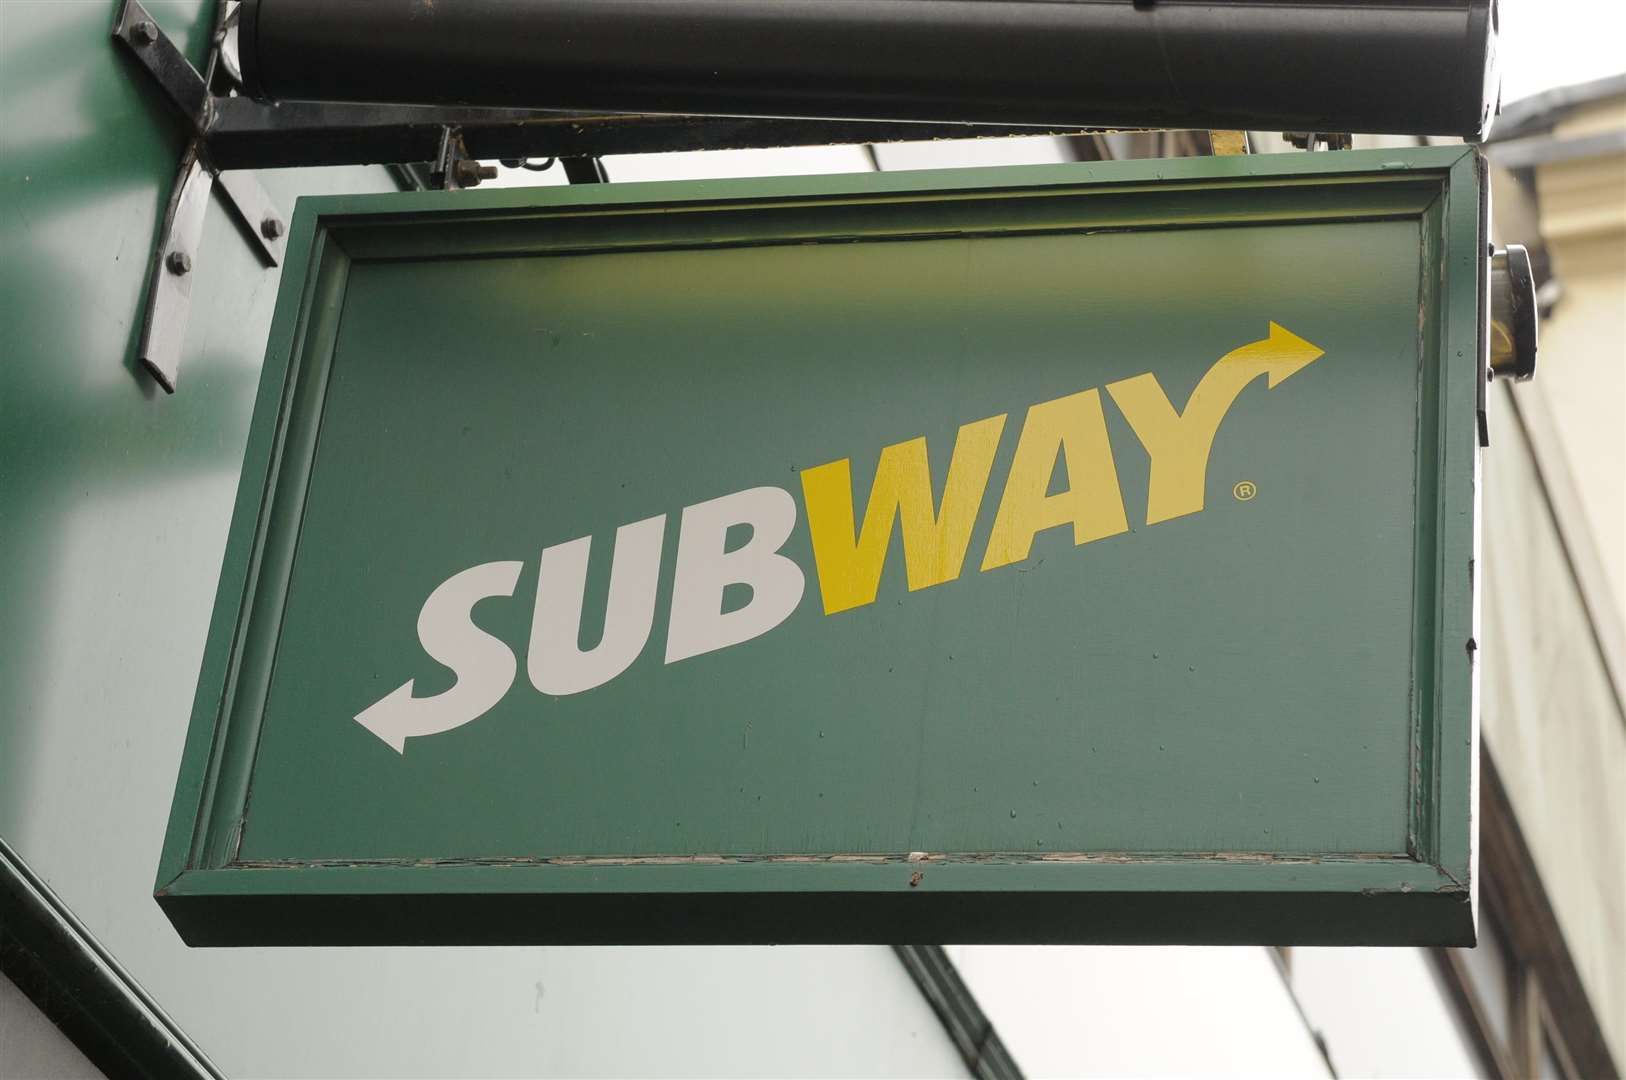 A Subway franchise owner could be issued with a court order